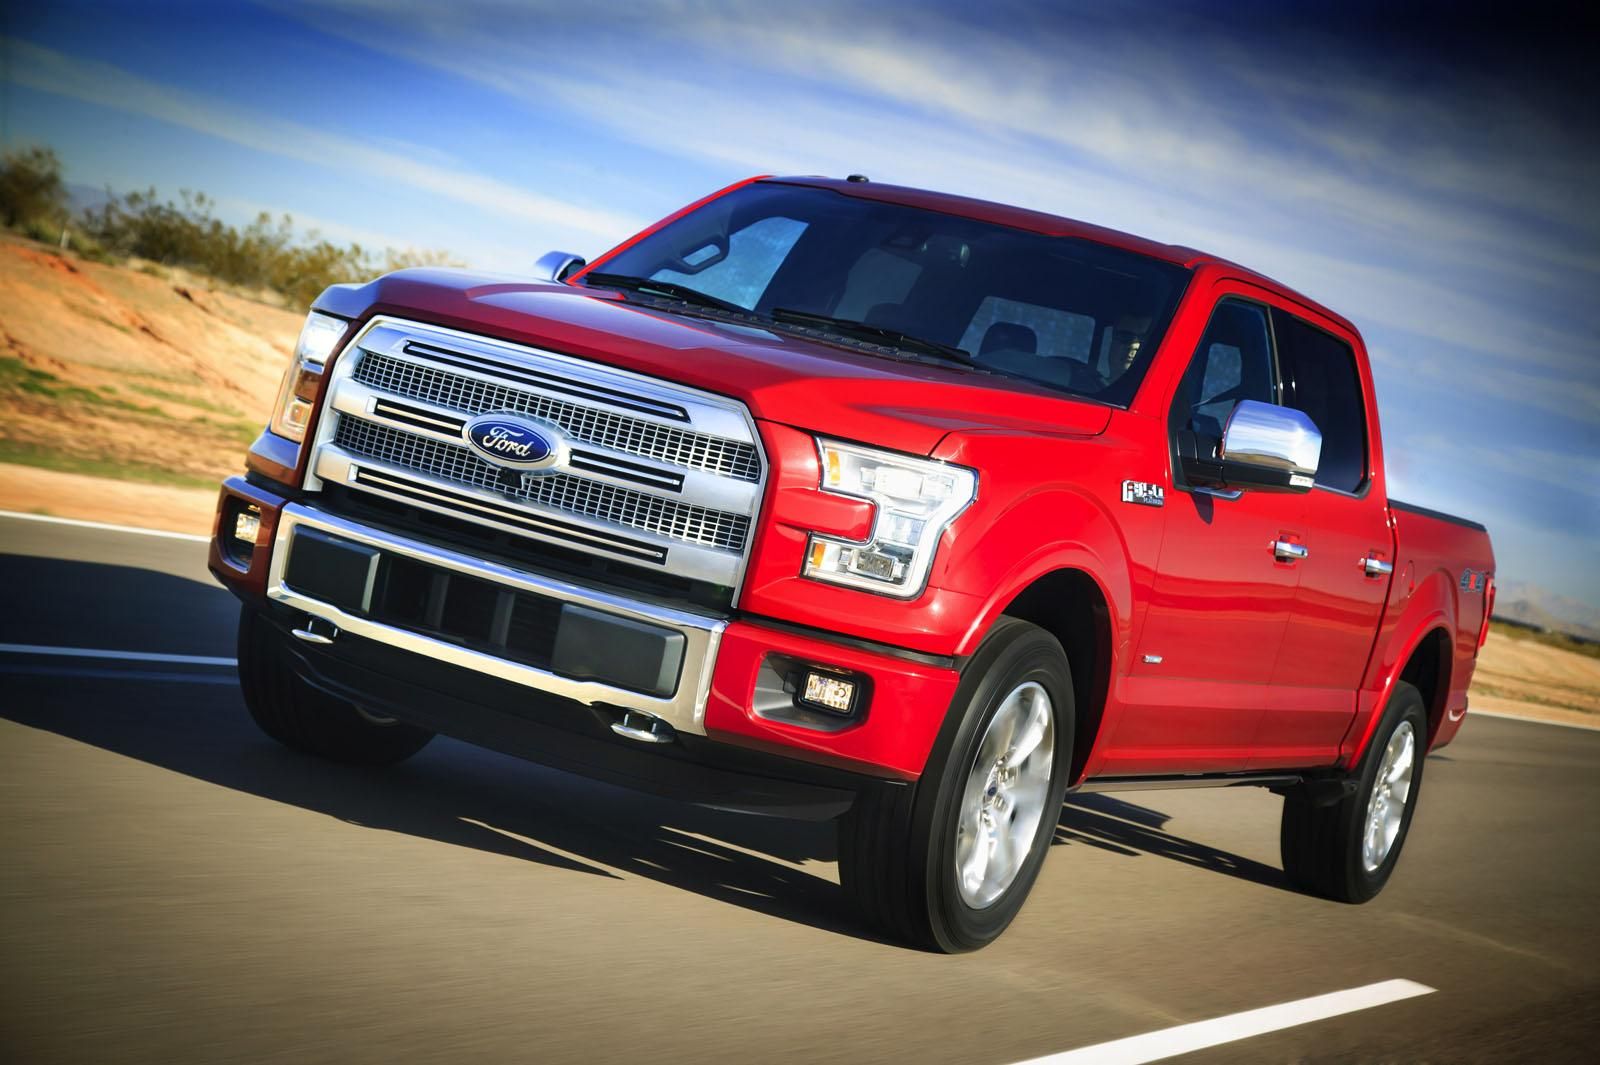 YEN 2015 FORD F150 RESM GALERS